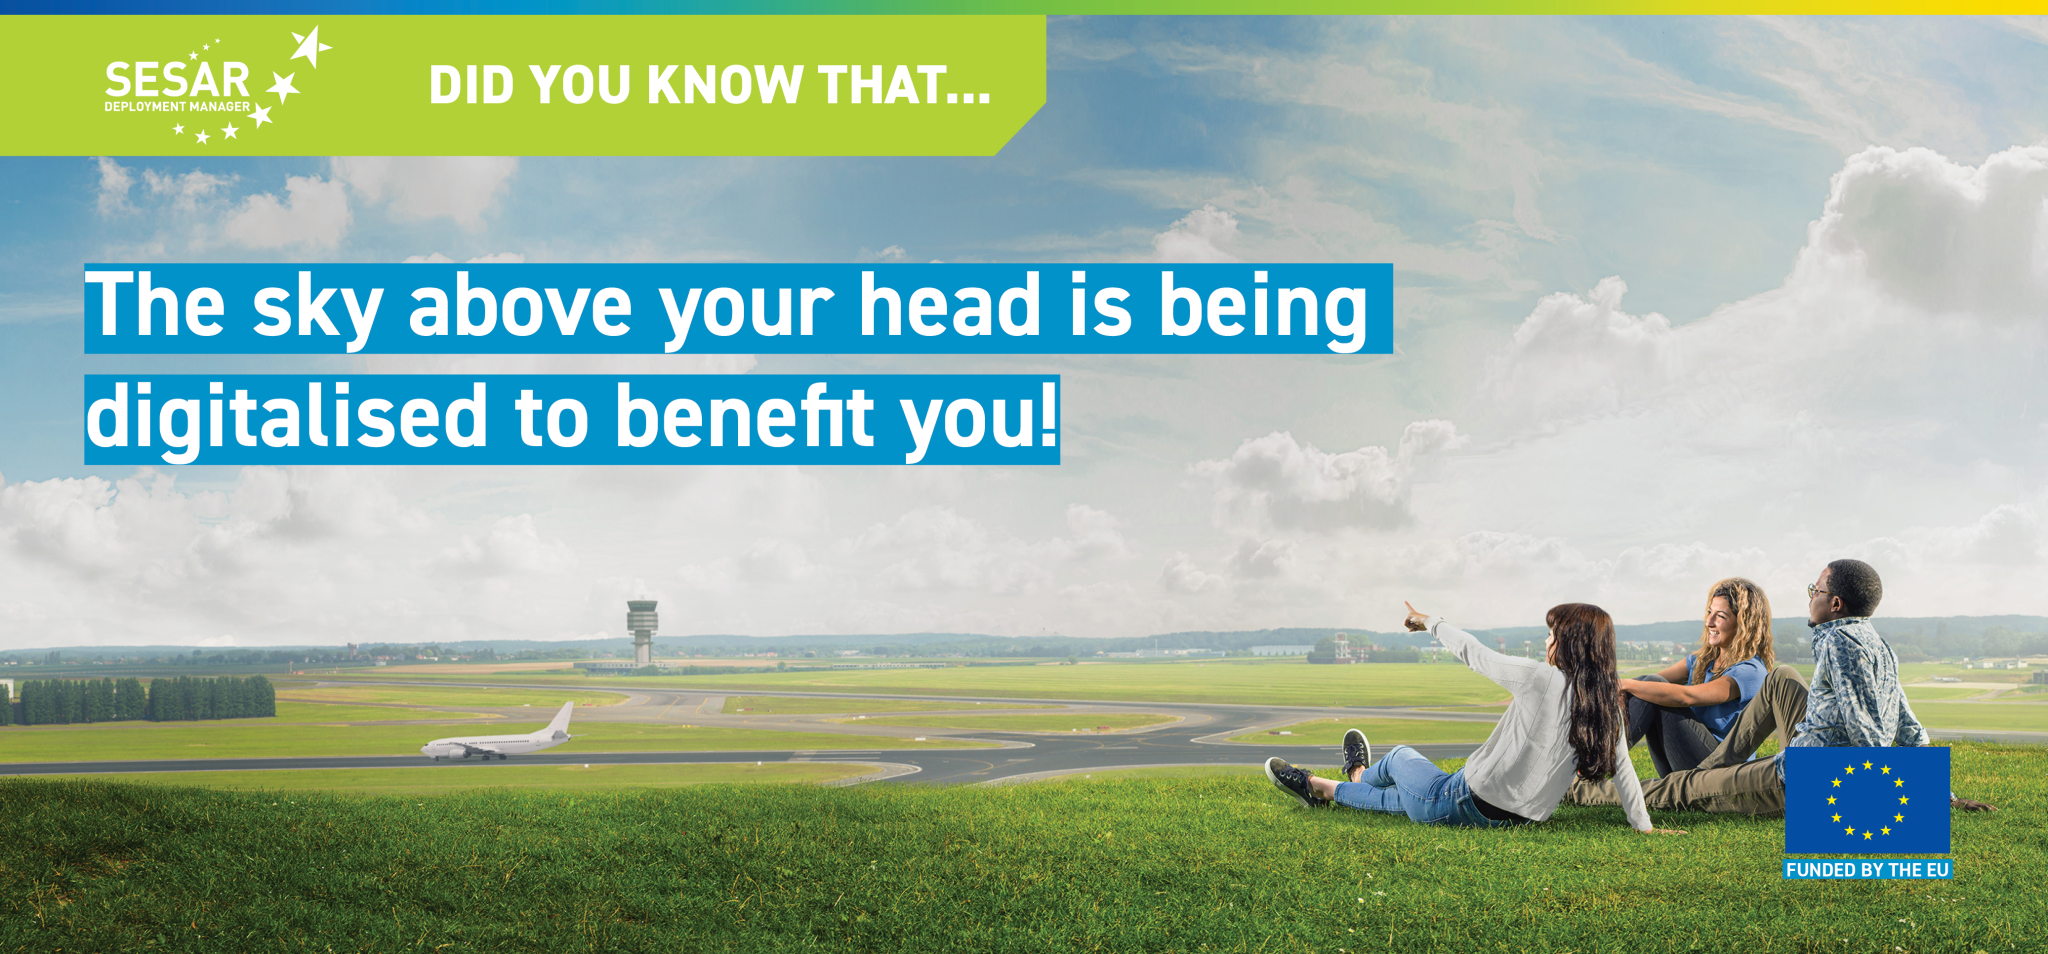 Did you know that... The sky above your head is being modernised and digitalised to benefit you! #DYKT